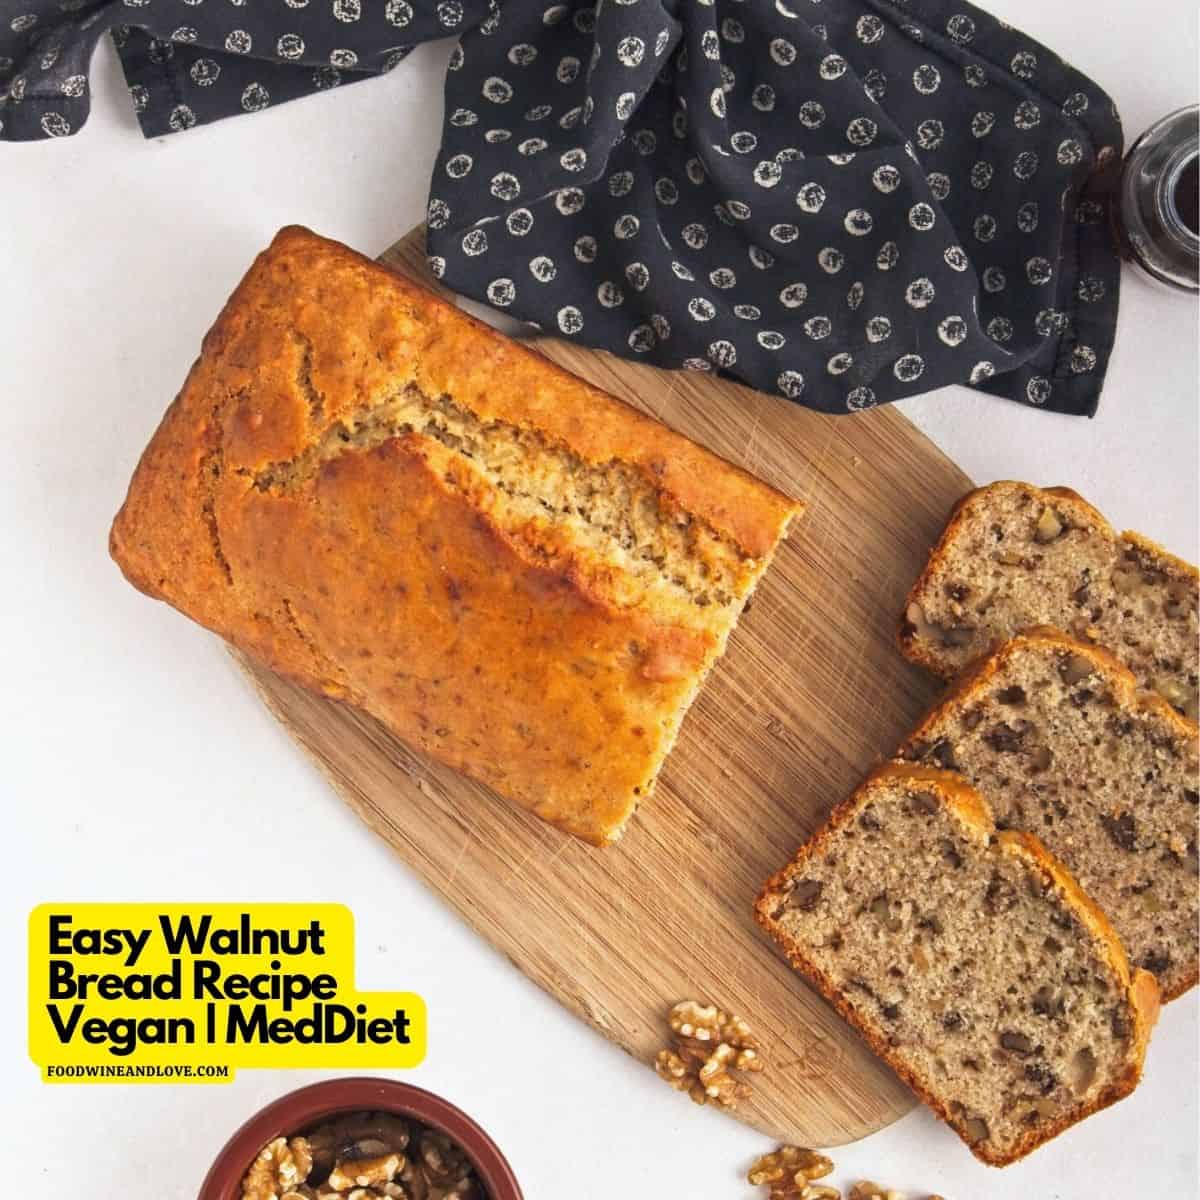 Easy Walnut Bread Recipe, a delicious flavorful and hearty quick bread  made with chopped walnuts. Vegan, Mediterranean Diet friendly.